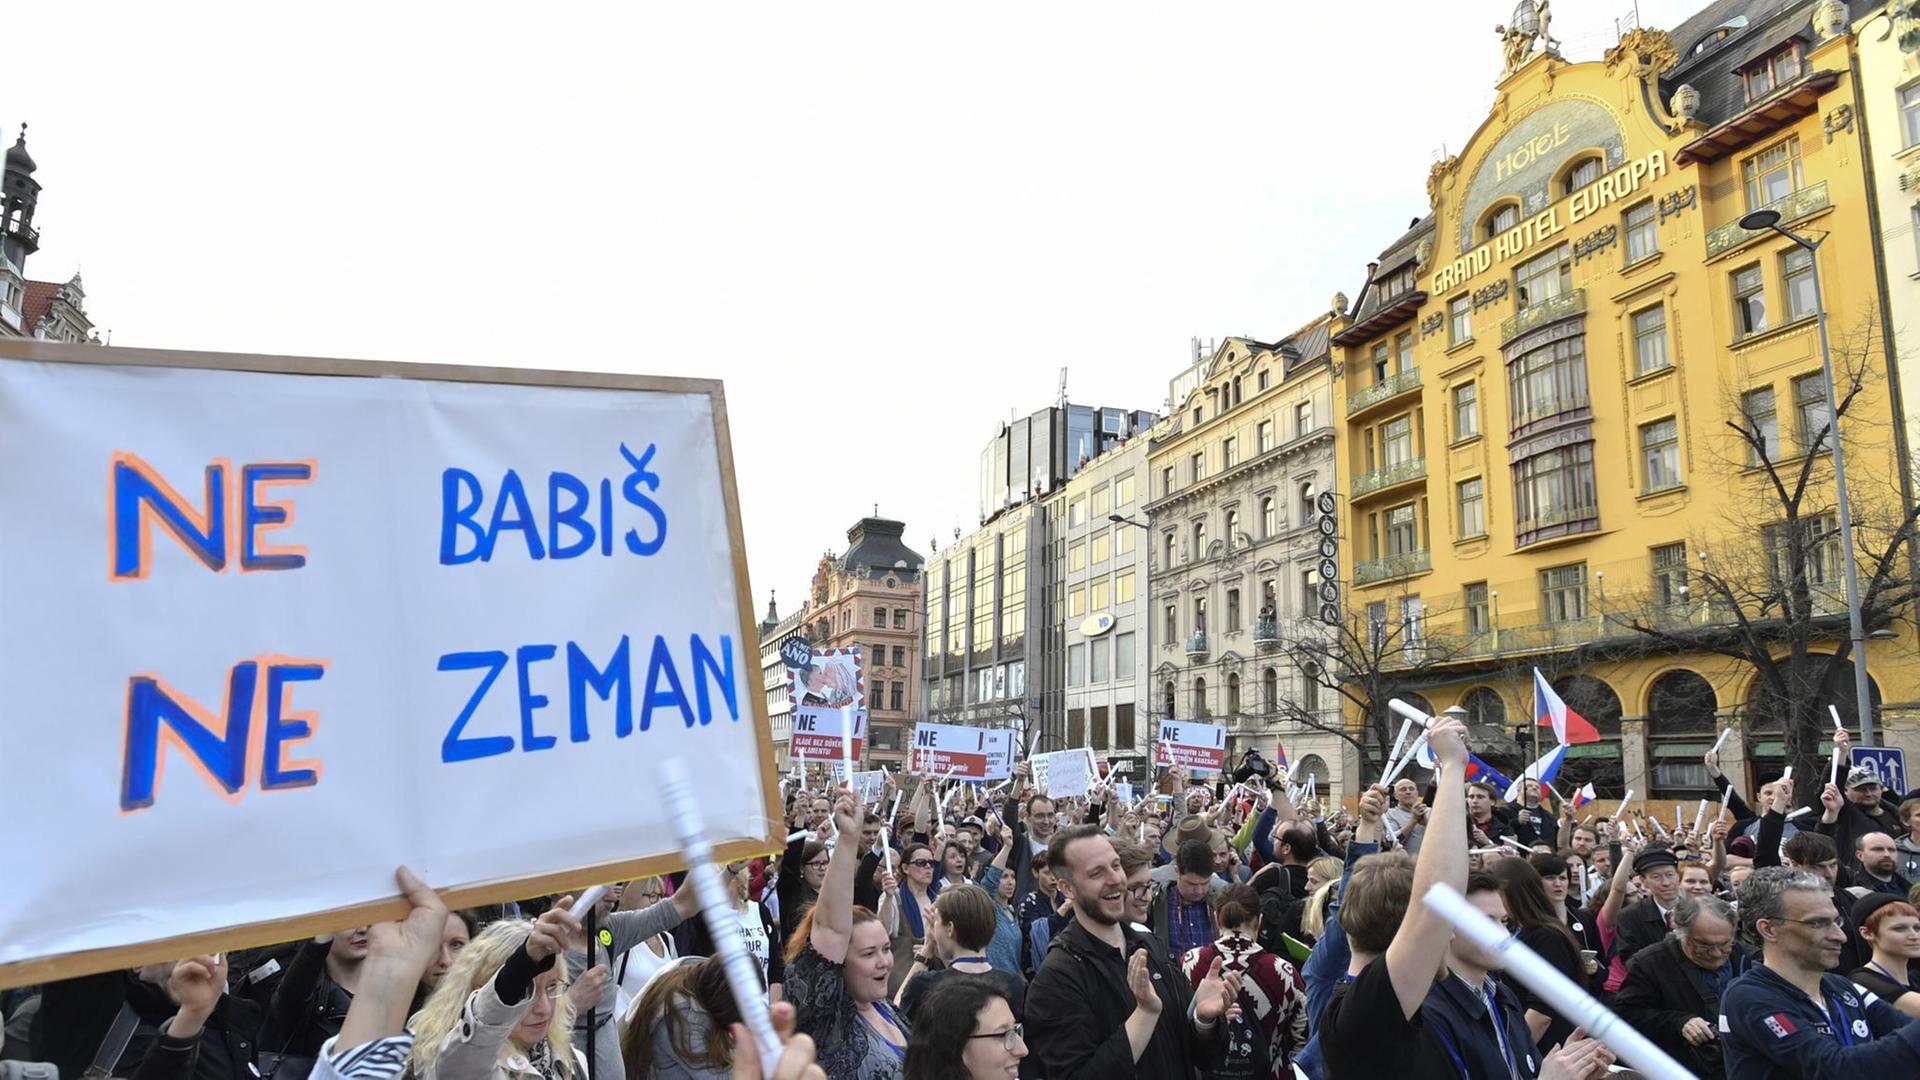 Public protest against steps taken by criminally prosecuted Prime Minister Andrej Babis and his cabinet ruling without parliament's confidence took place at Wenceslas Square, Prague, Czech Republic on Monday, April 9, 2018.